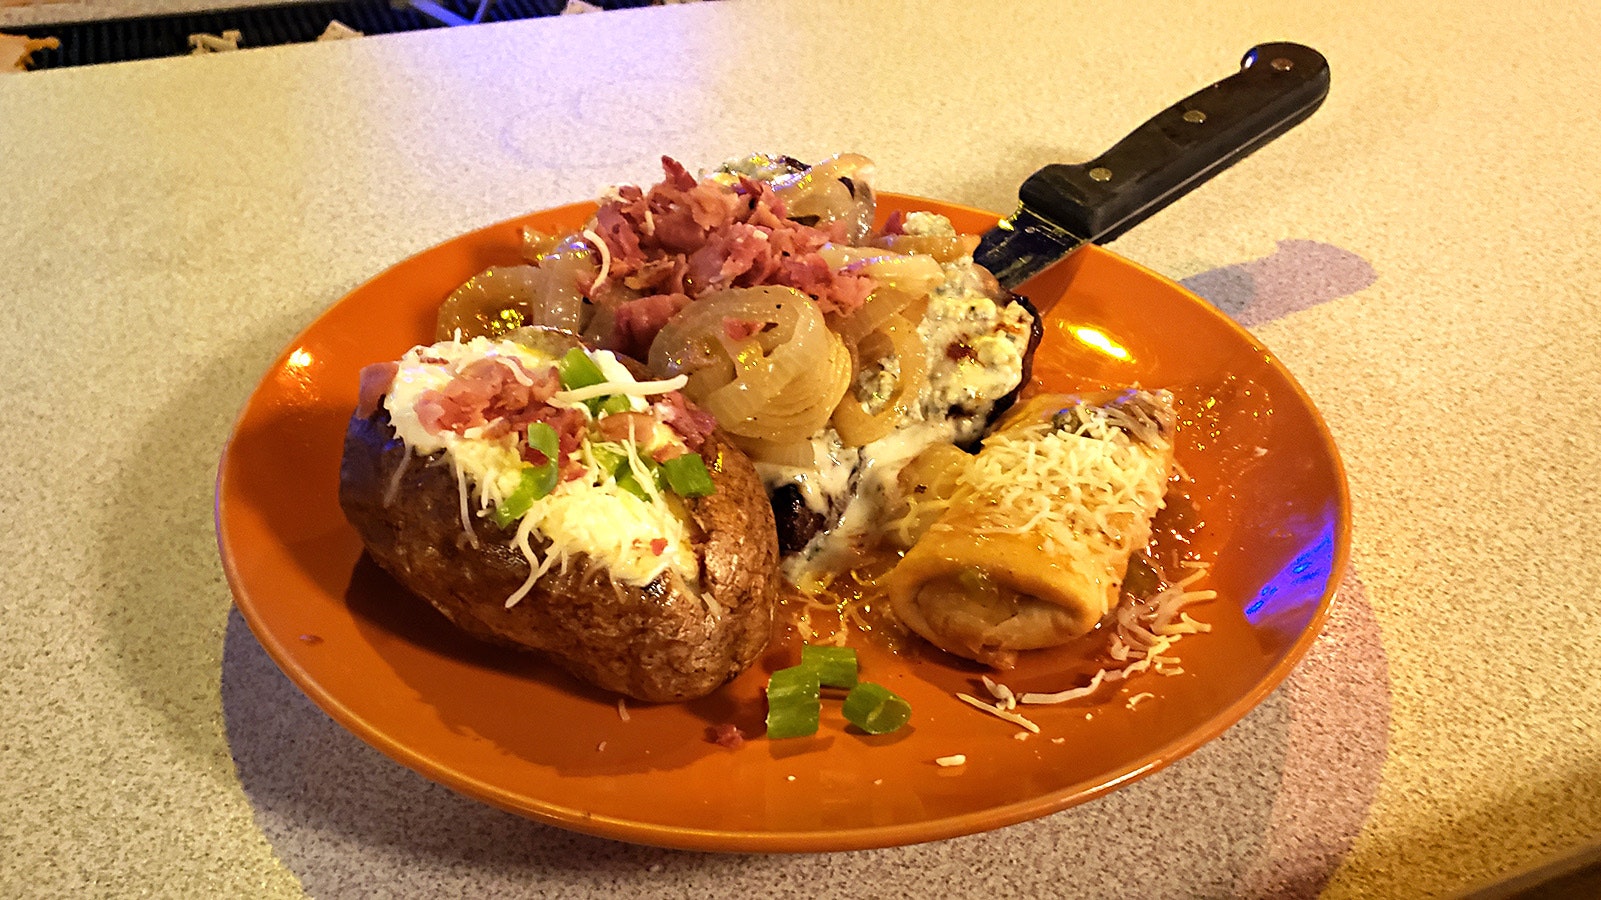 The Bobbie Blue Bland served with a baked potato and signature miniature chimichanga on the side.